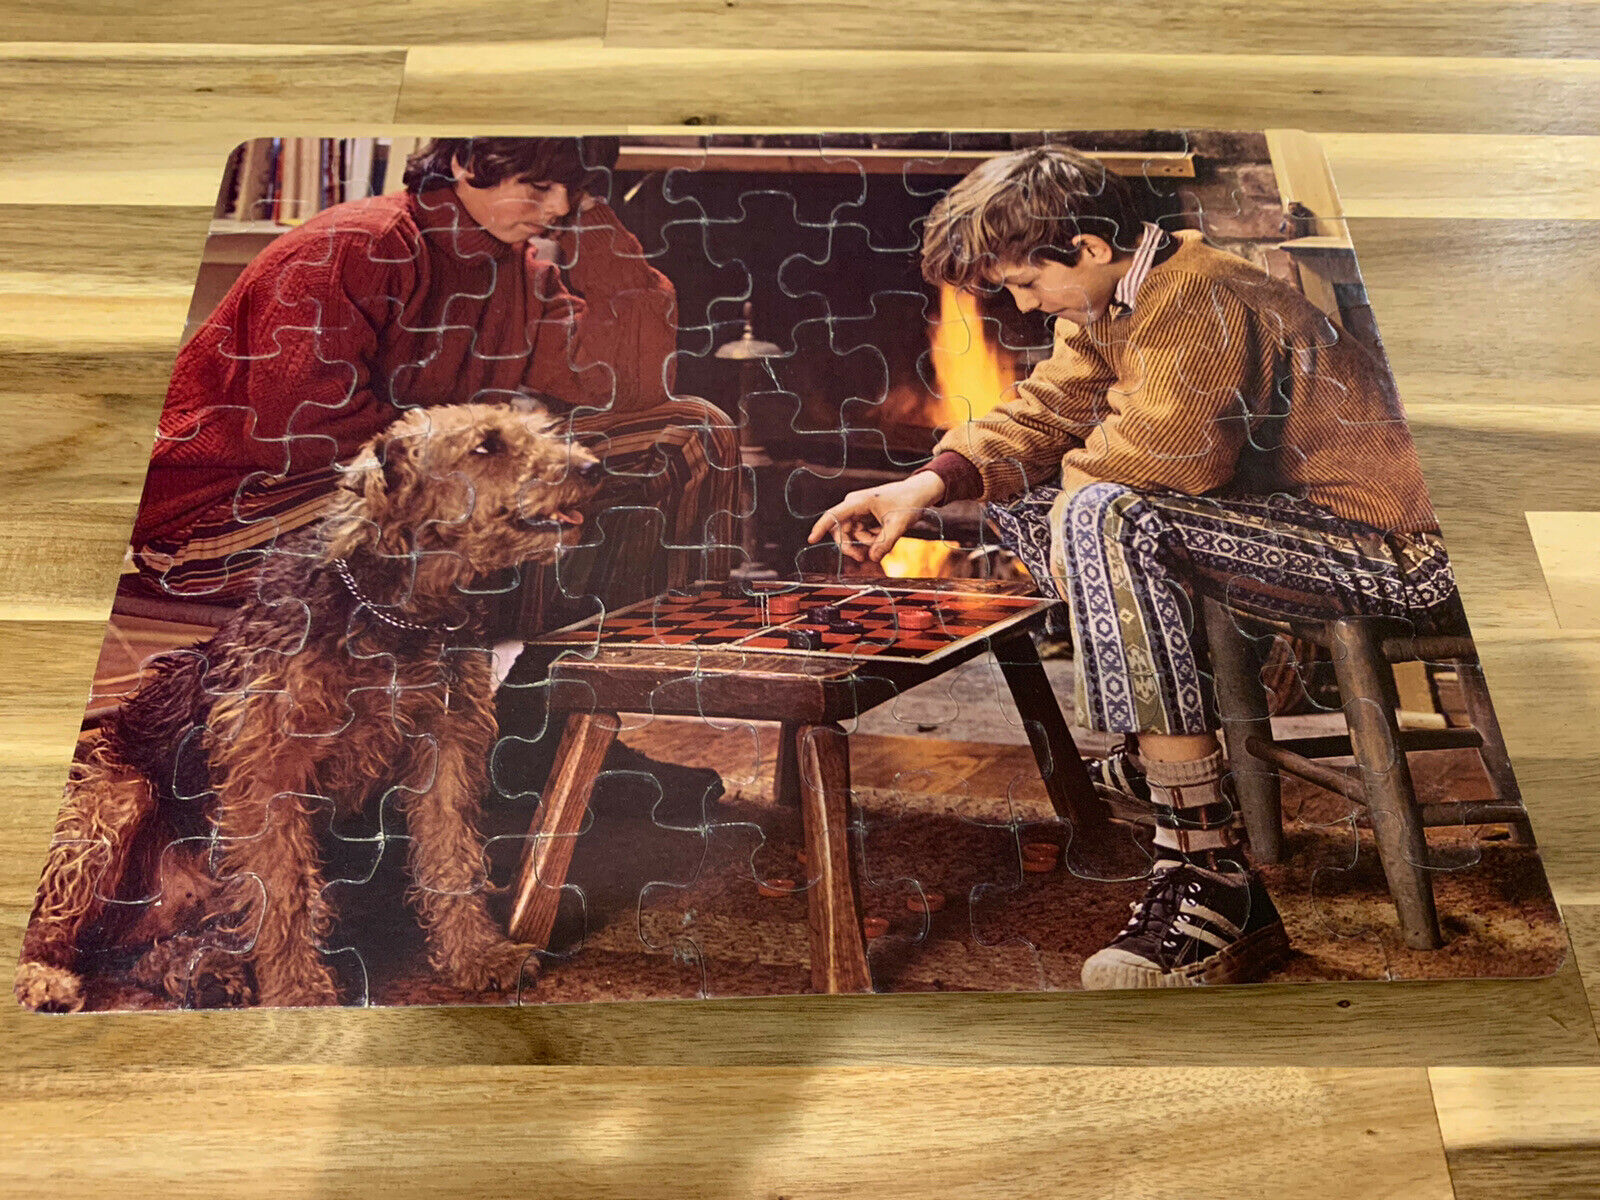 Vtg 1970s Whitman Family Guild Jigsaw Puzzle Large Pieces Checkers Boys Dog Fire